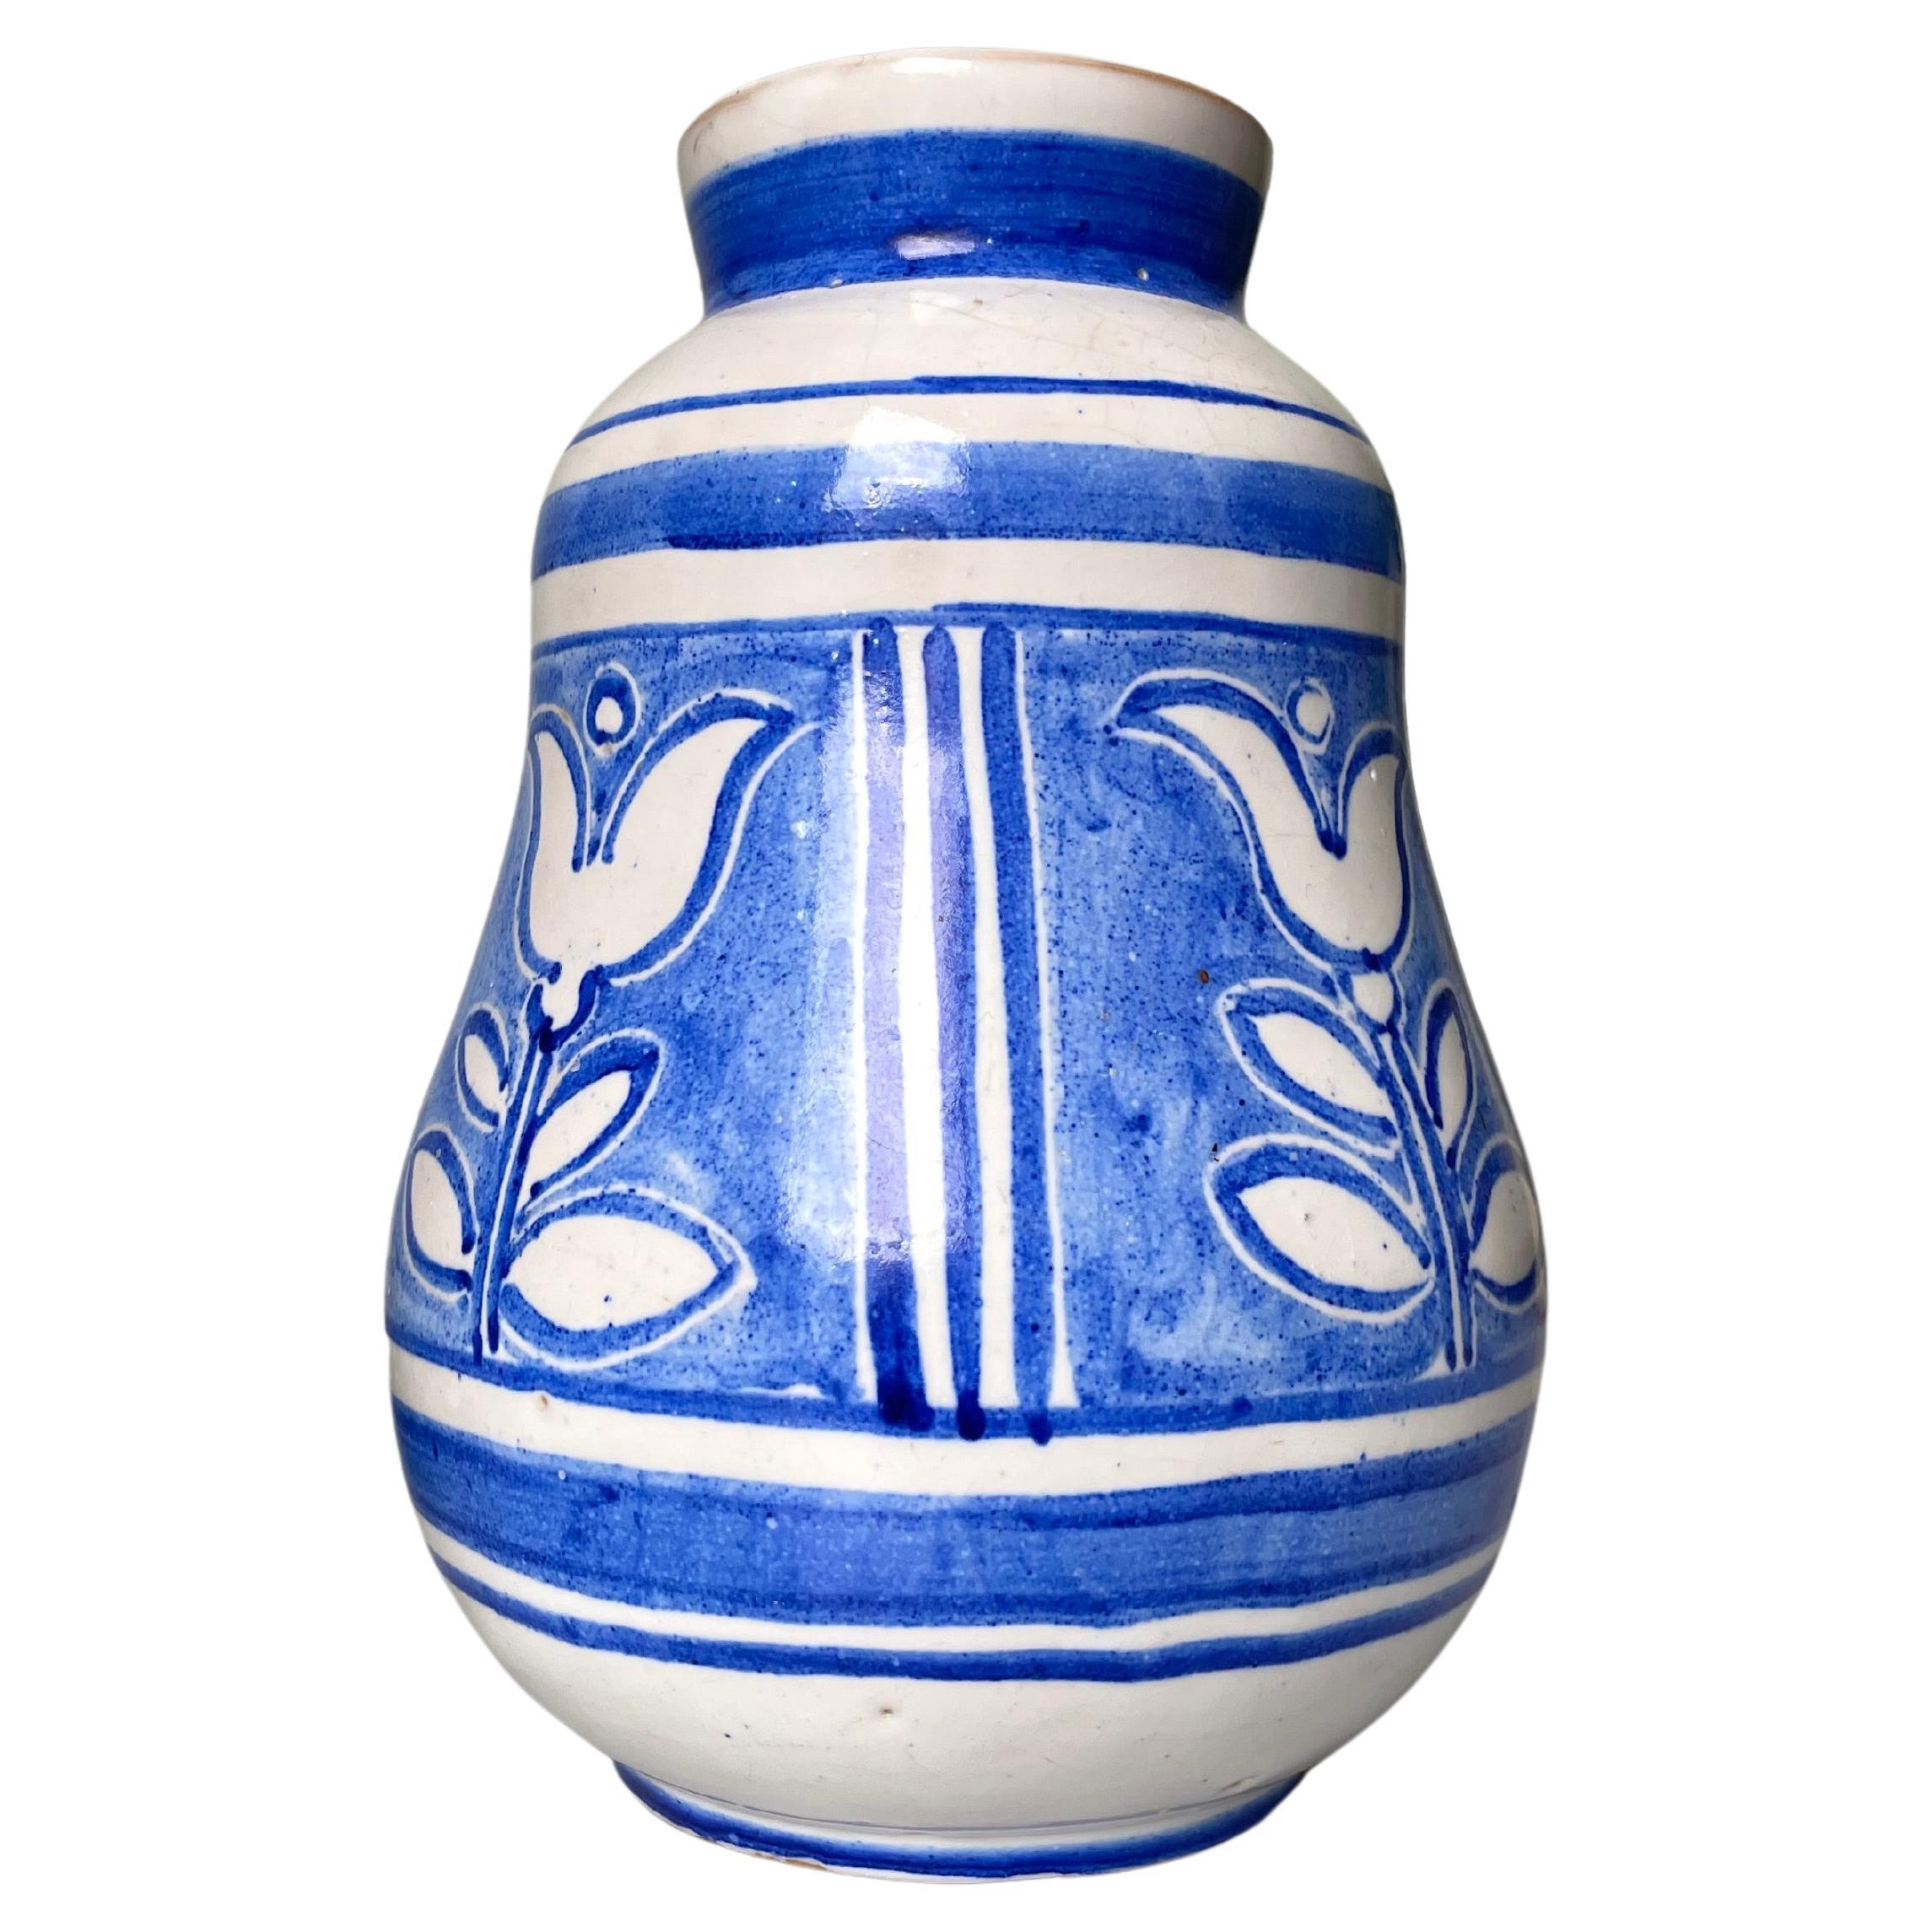 Nordic White Hand-Decorated Blue Floral Ceramic Vase, 1950s For Sale